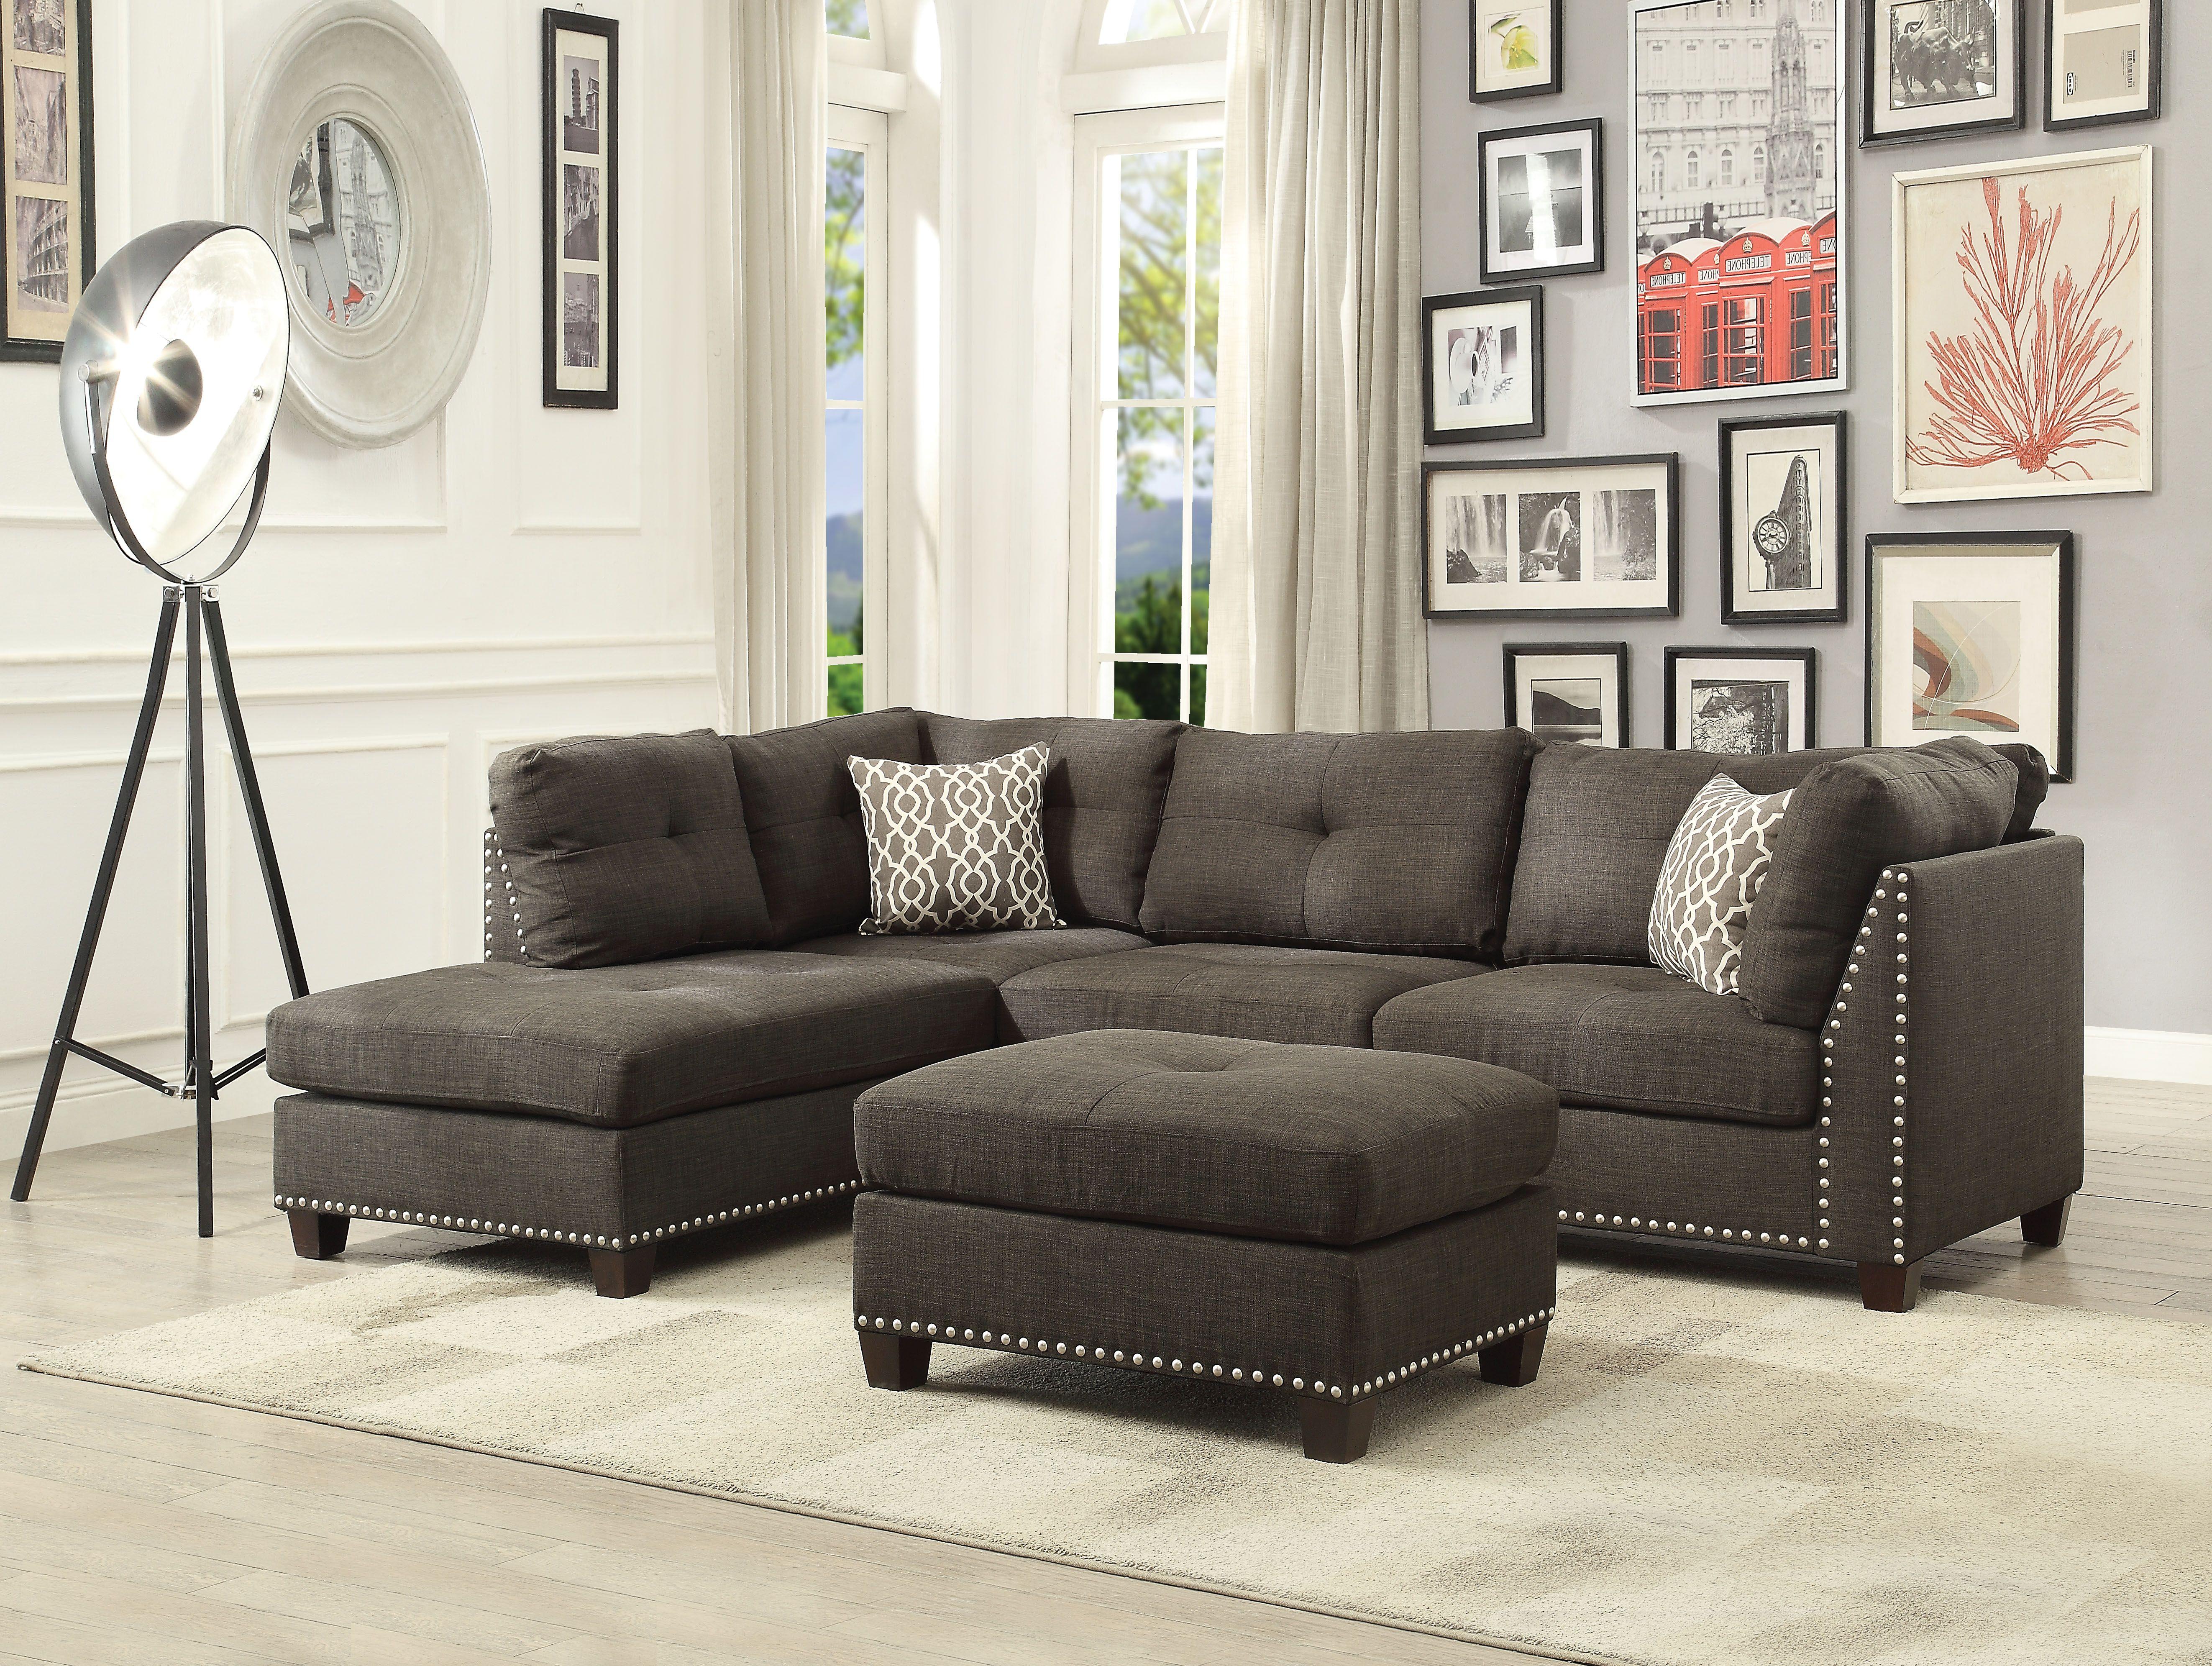 

    
Contemporary Charcoal RF Chaise Sectional Sofa & Ottoman by Acme Laurissa 54375-3pcs
